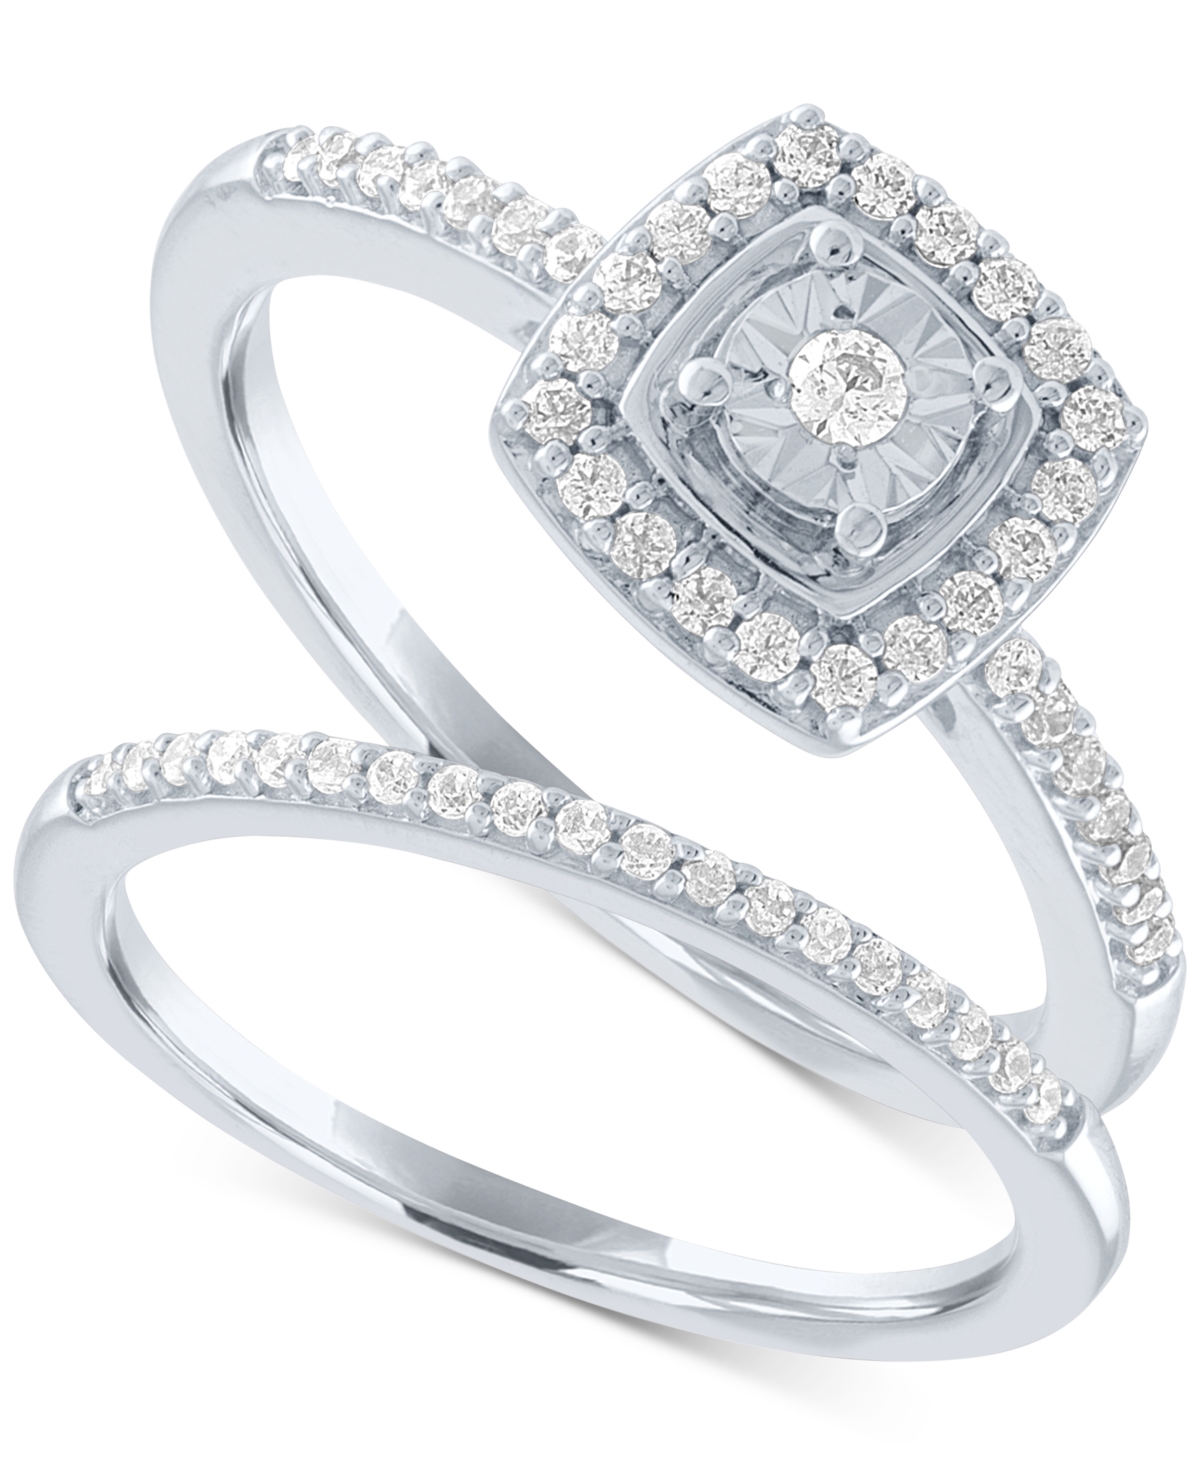 Diamond Bridal Set (1/4 ct. t.w.) in Sterling Silver - Sterling Silver